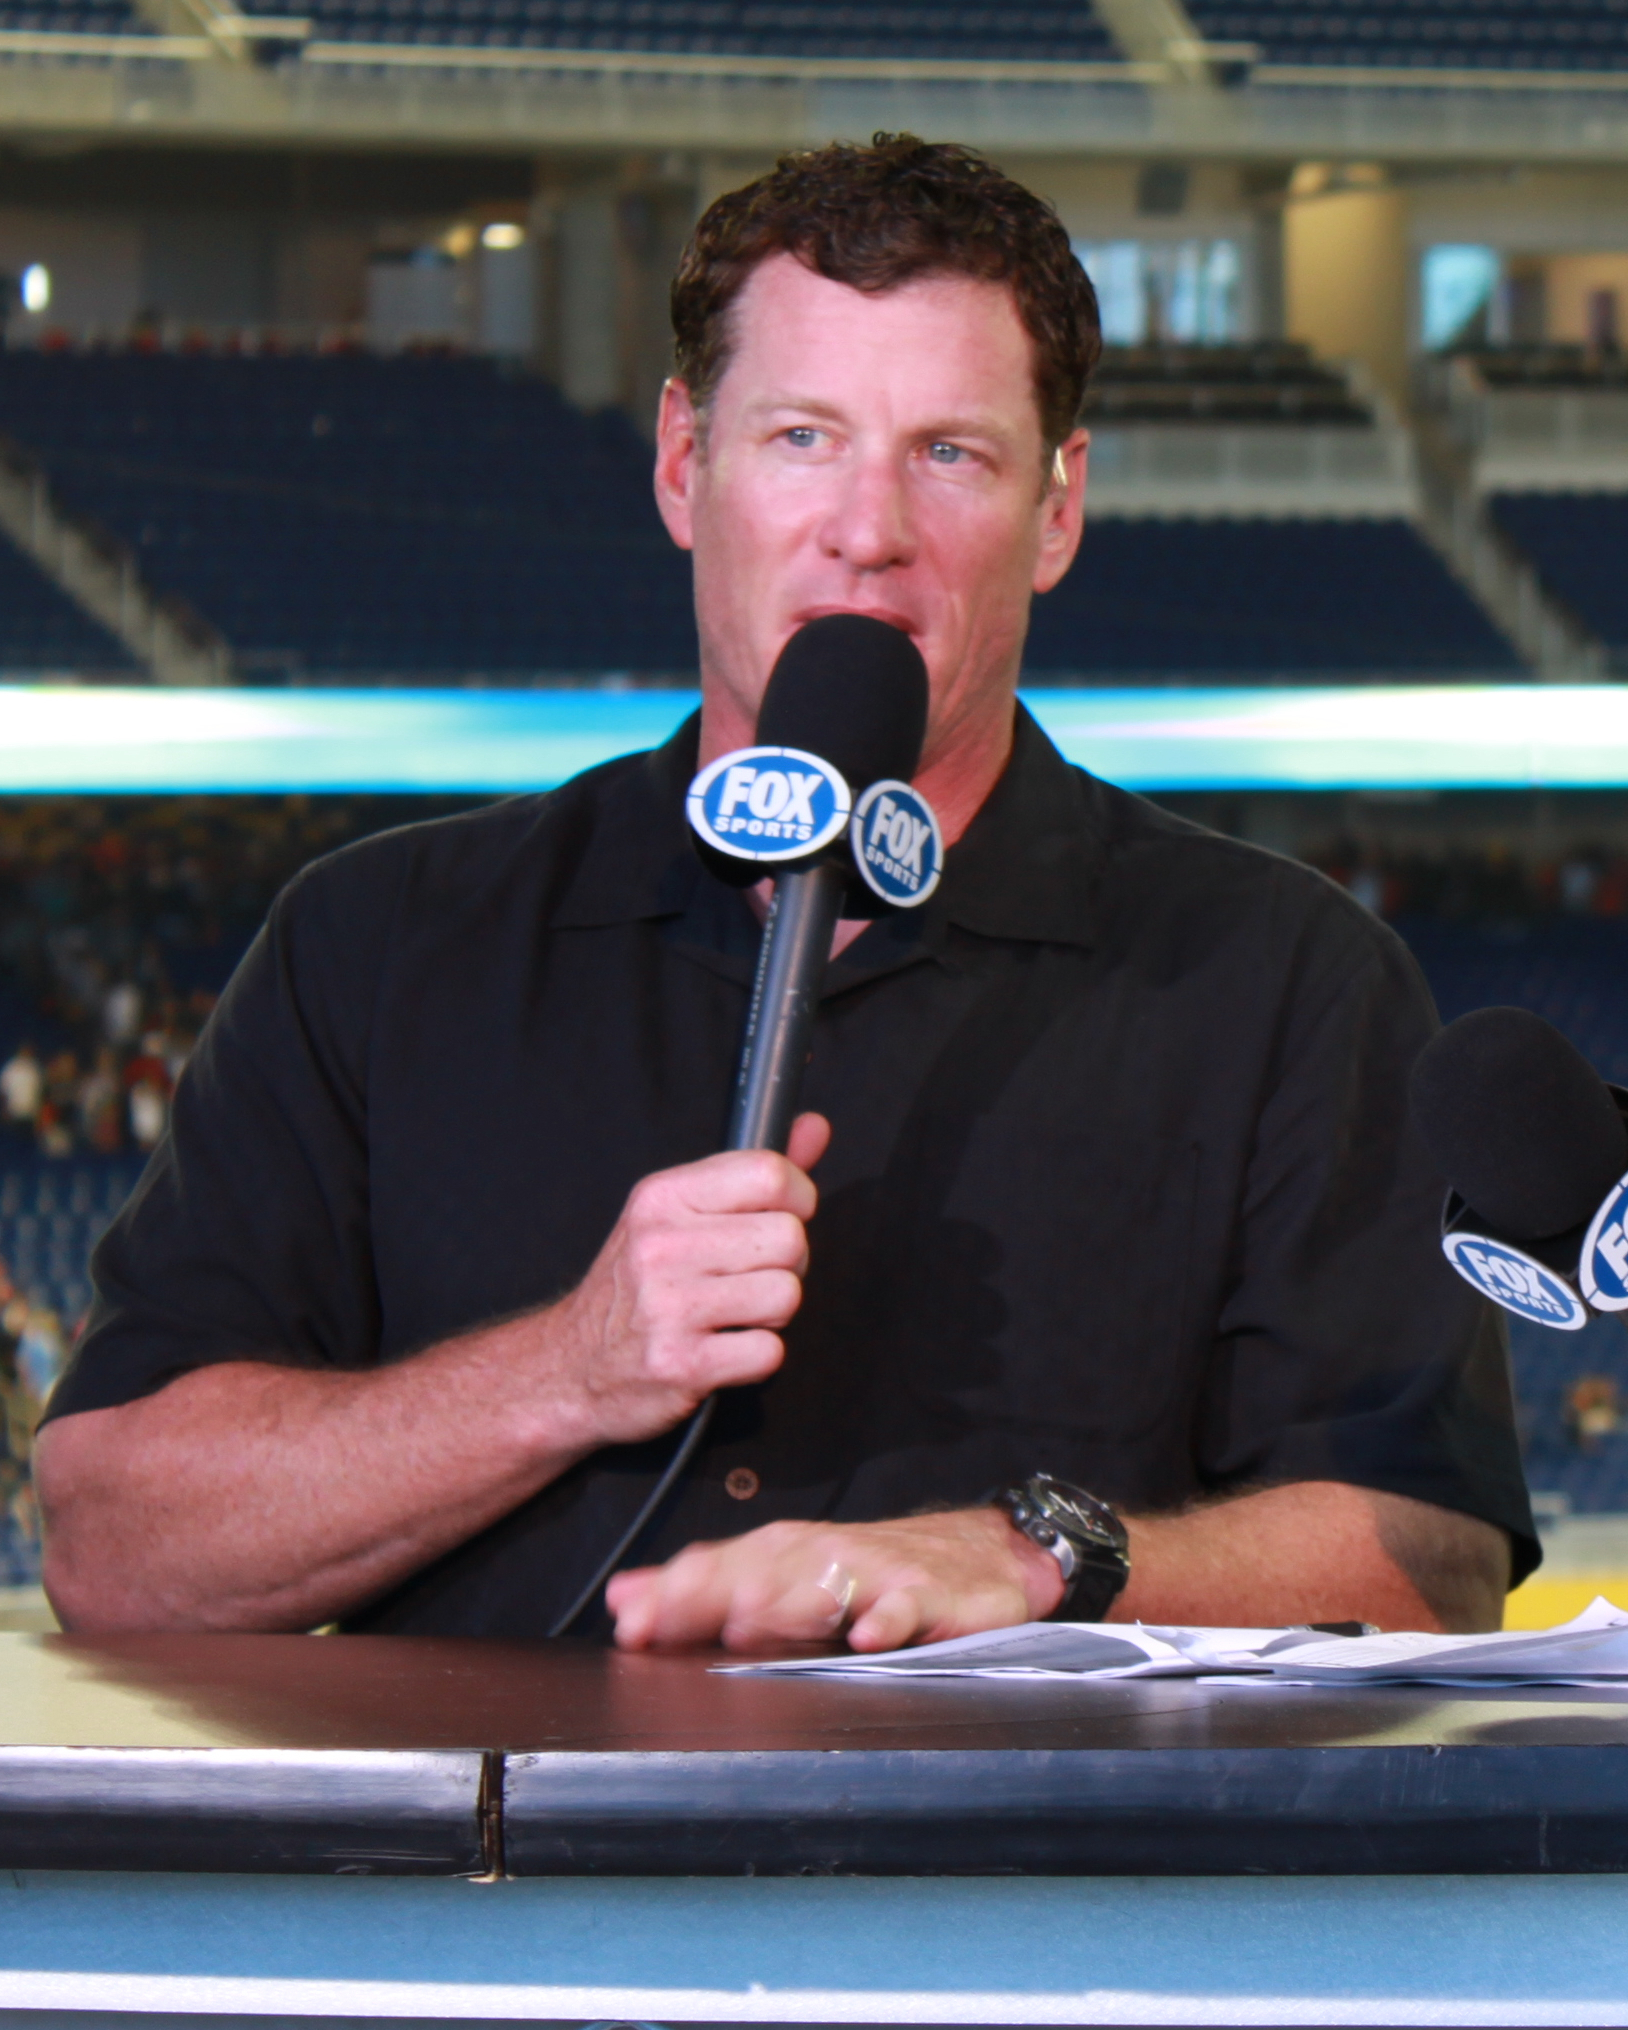 Marlins Hall of Fame: Jeff Conine Induction Video 